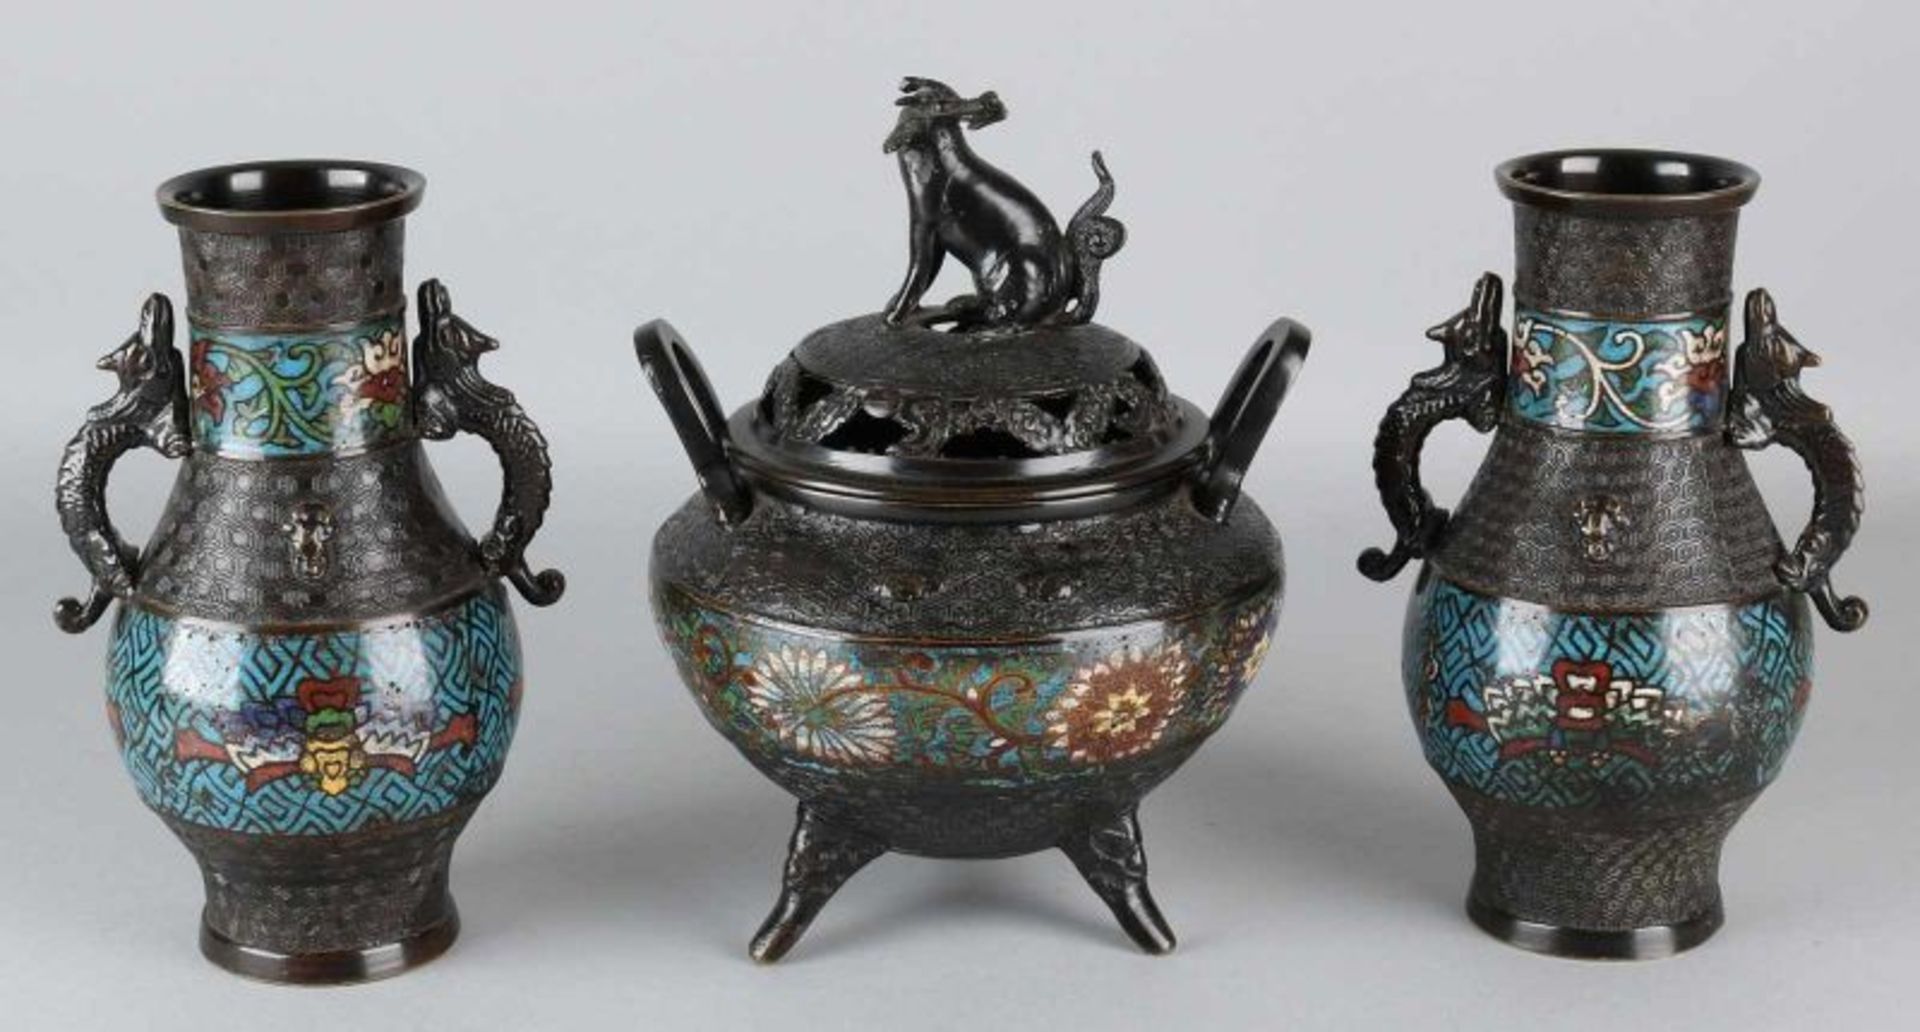 Three-piece 19th century Japanese bronze incense set with cloisonne and dragon decor. Size: 21.5 -